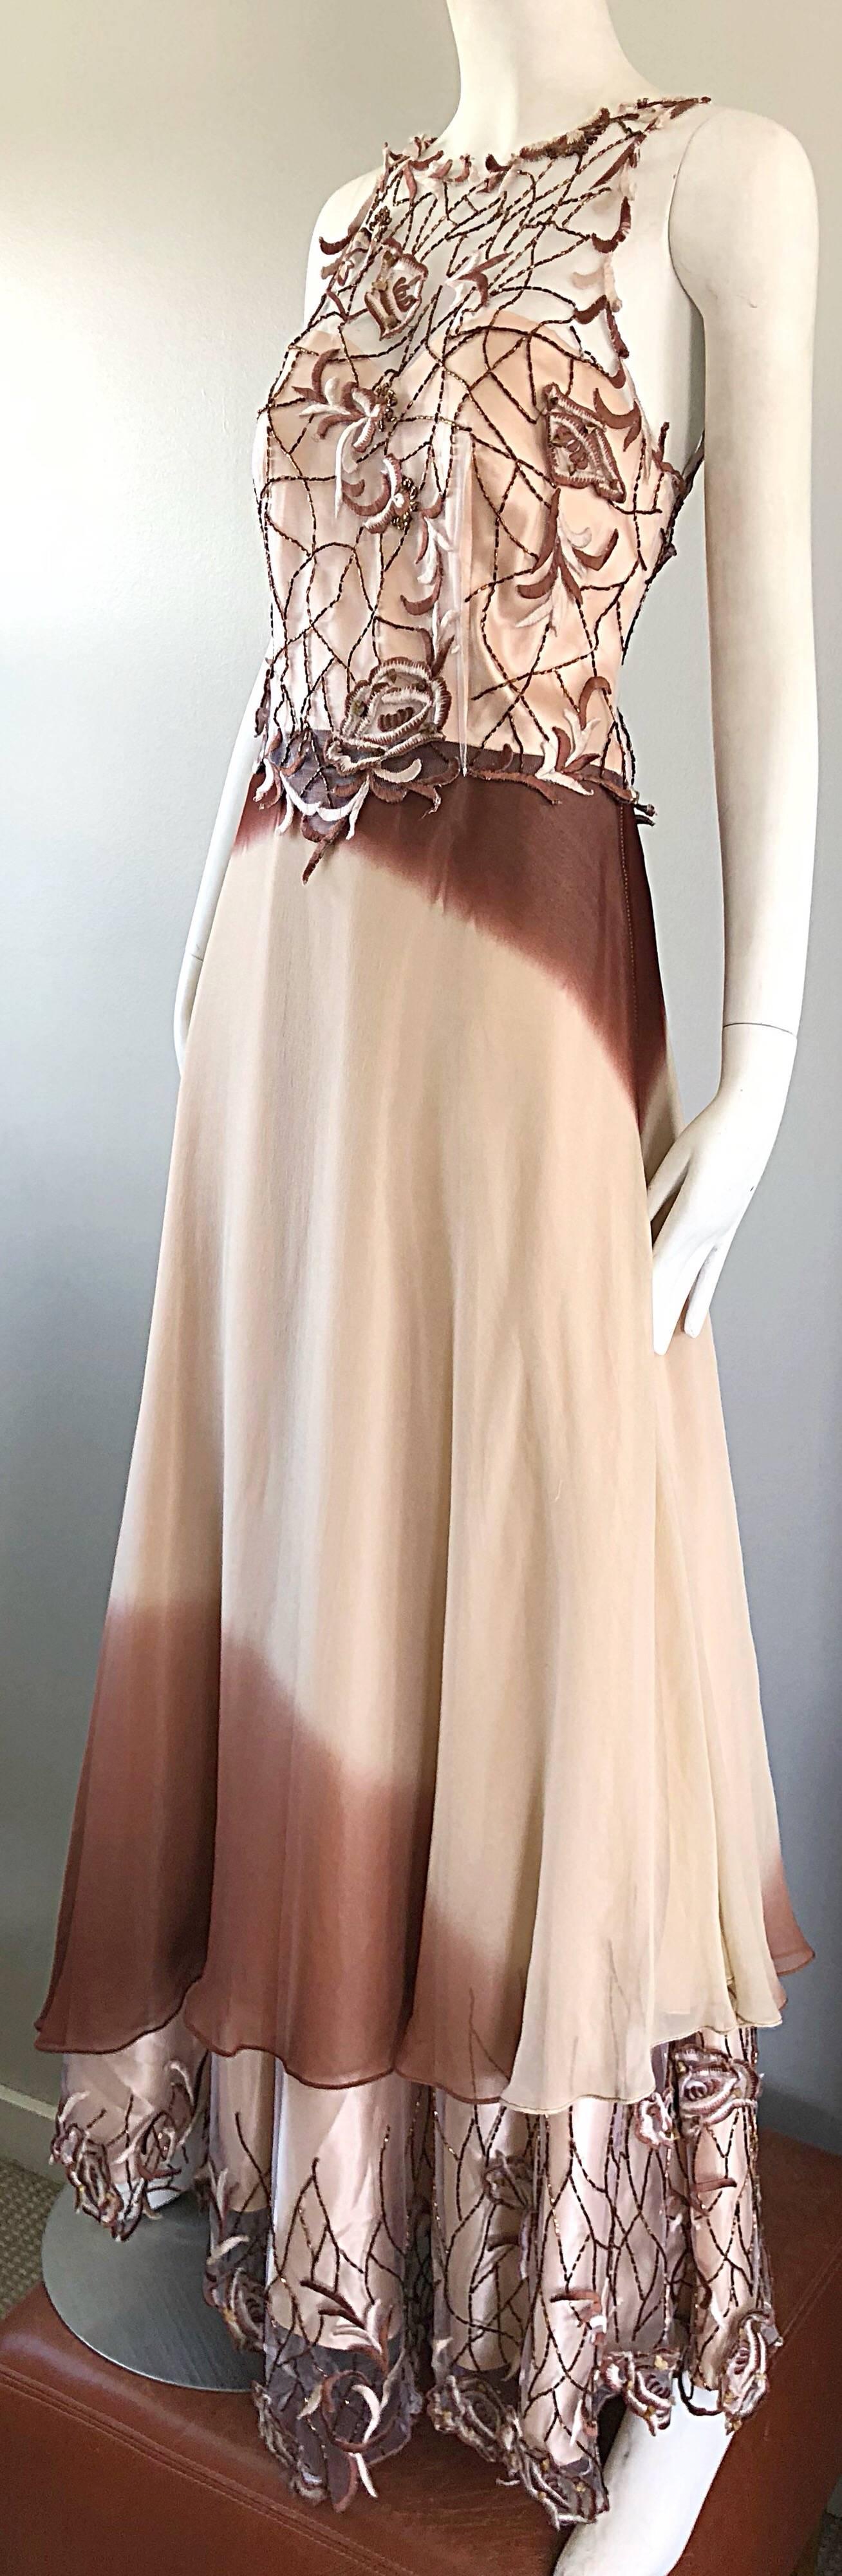 Max Nugus Haute Couture 1990s Size 6 8 Pink Brown Ombre Chiffon Vintage 90s Gown For Sale 6